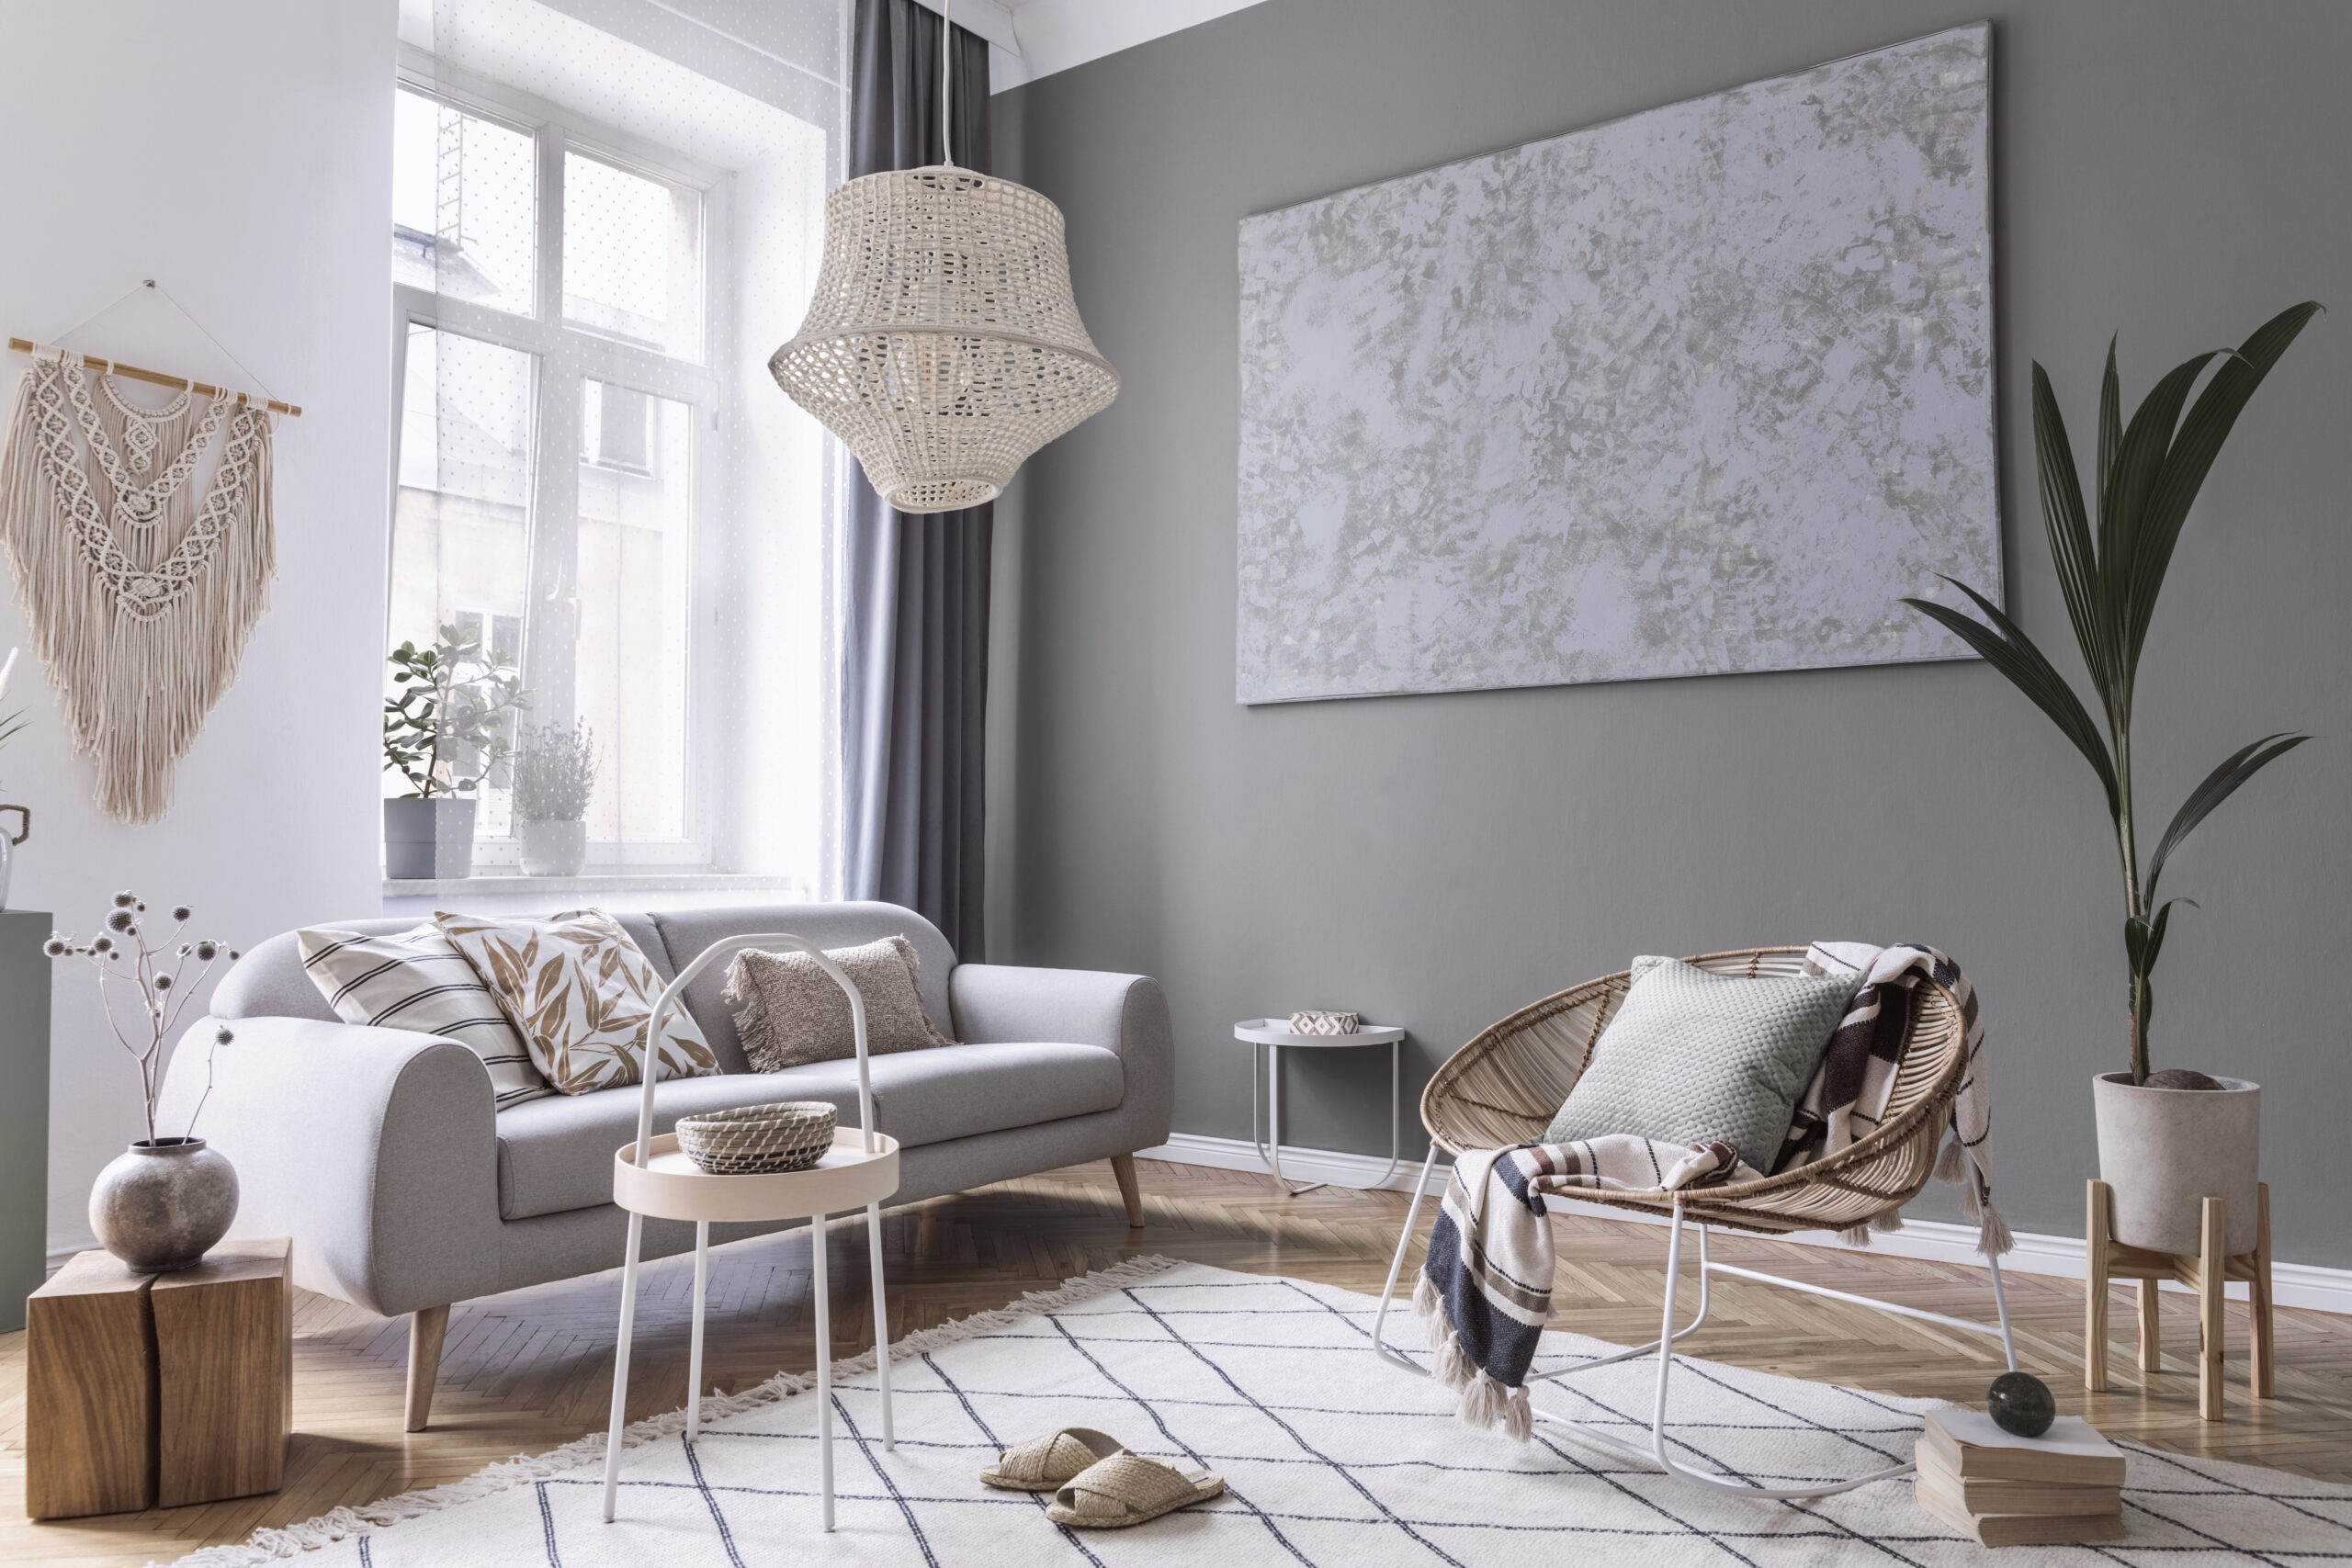 Eclectic Interior Design with grey walls and grey sofa with wood accents